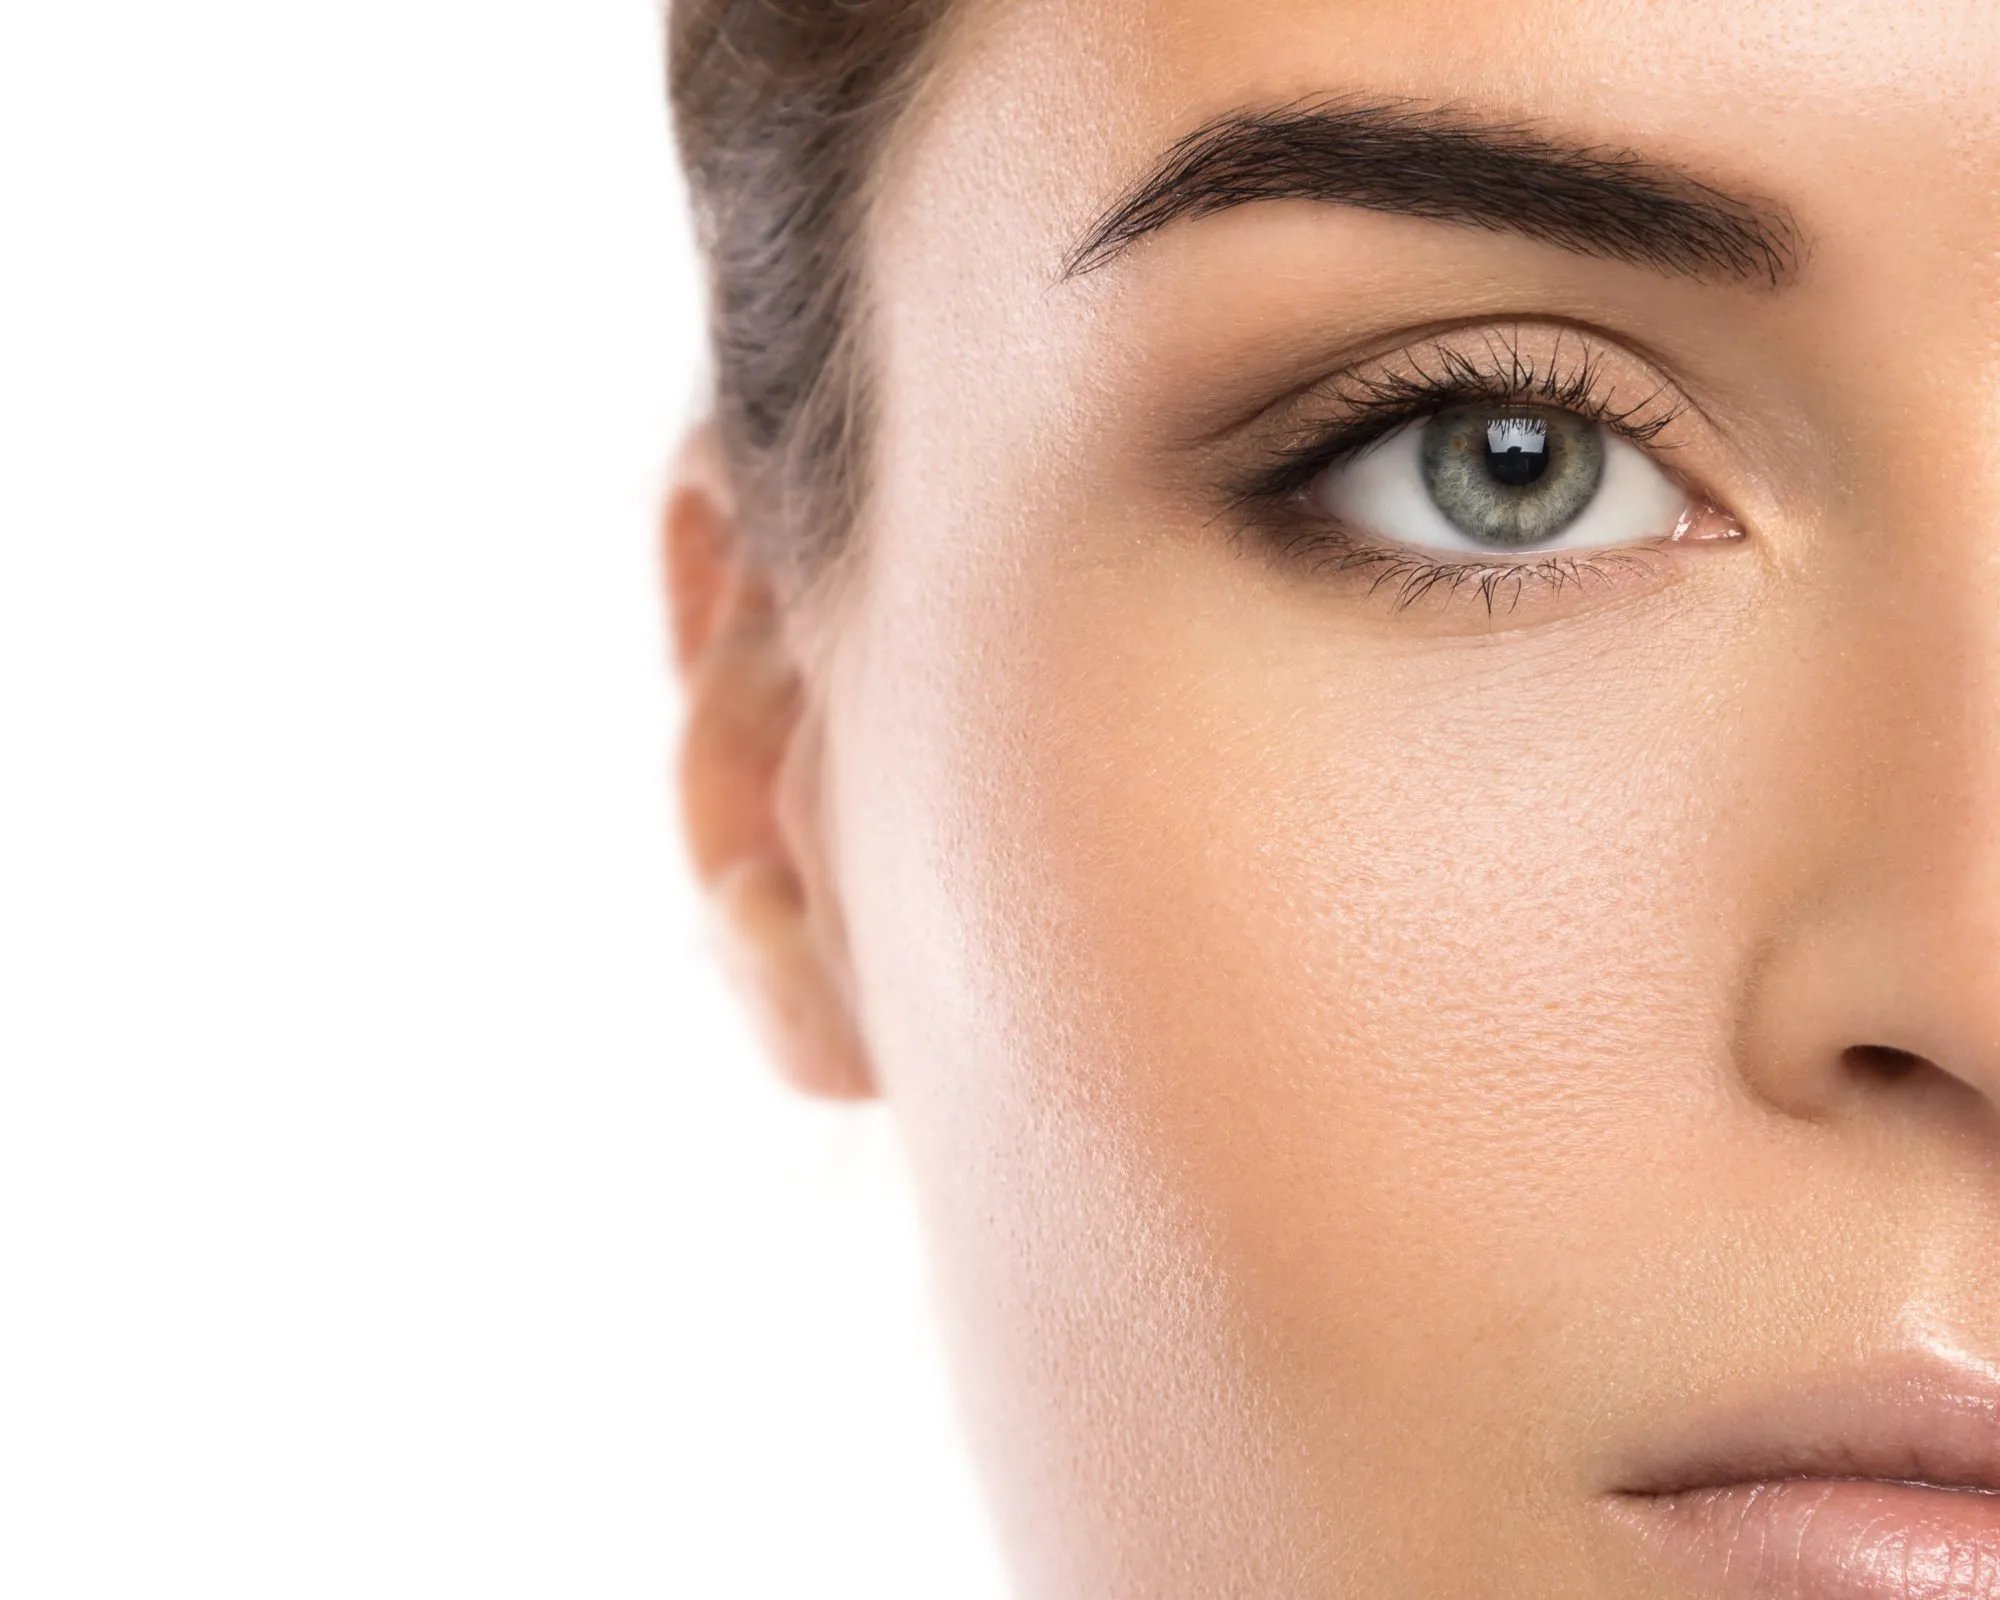 Here’s How You Can Take Care Of Your Eyebrows While At Home